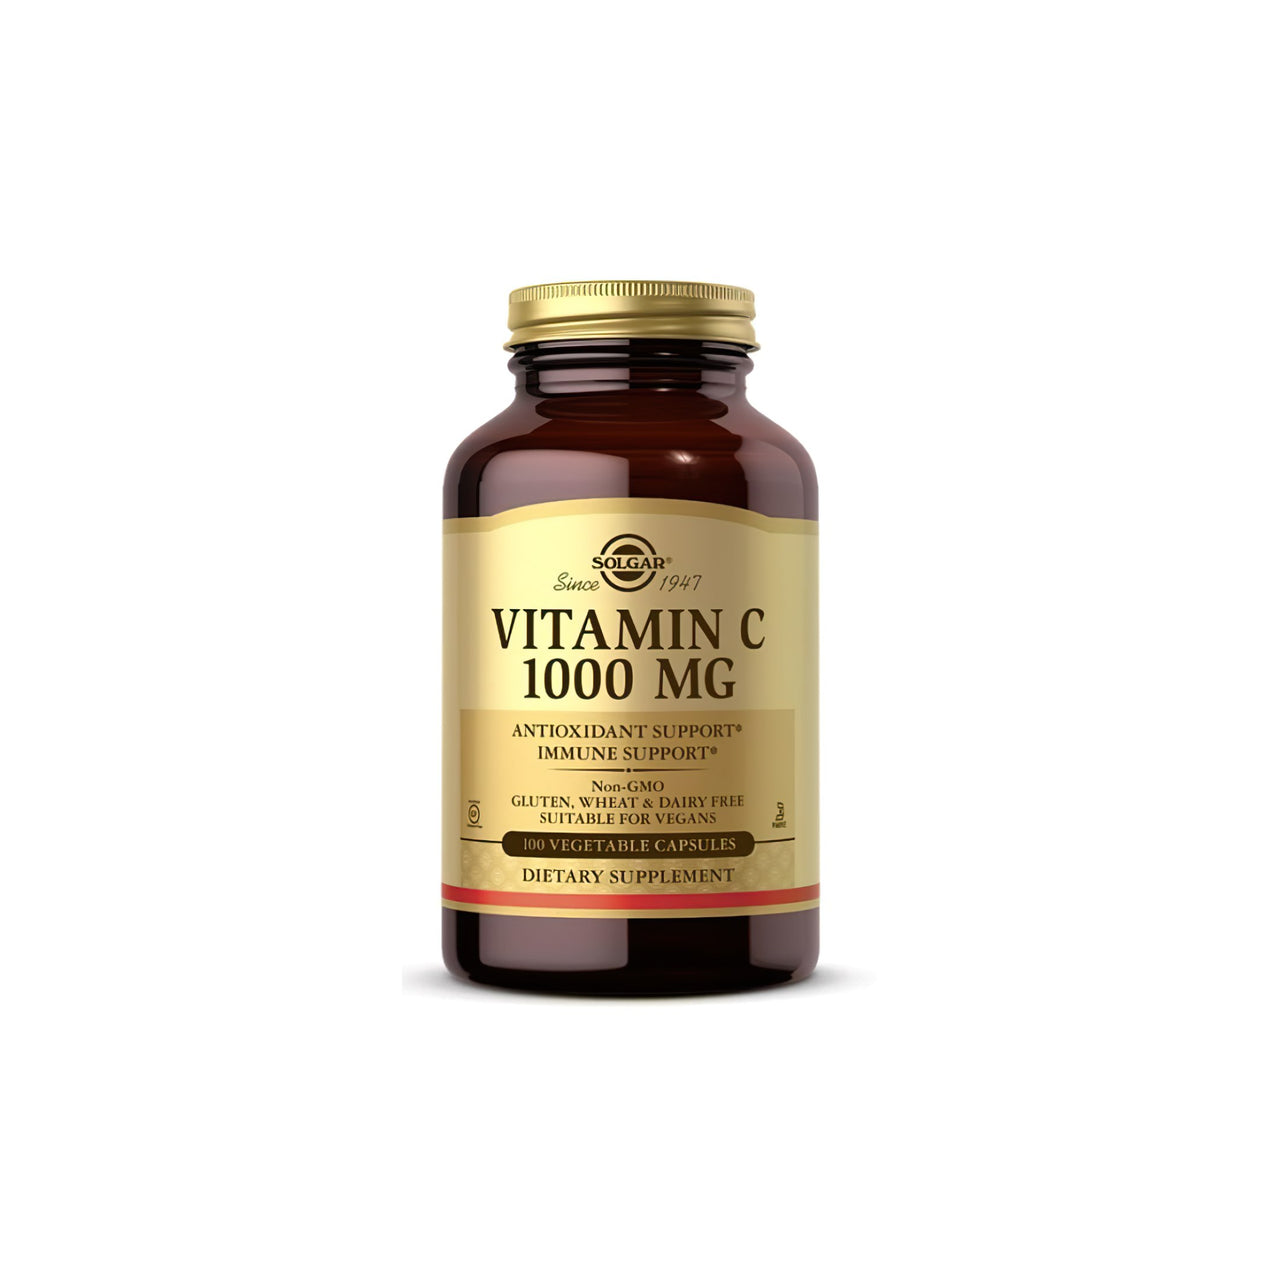 Solgar Vitamin C 1000 mg 100 vege capsules for immune system support and antioxidant benefits.